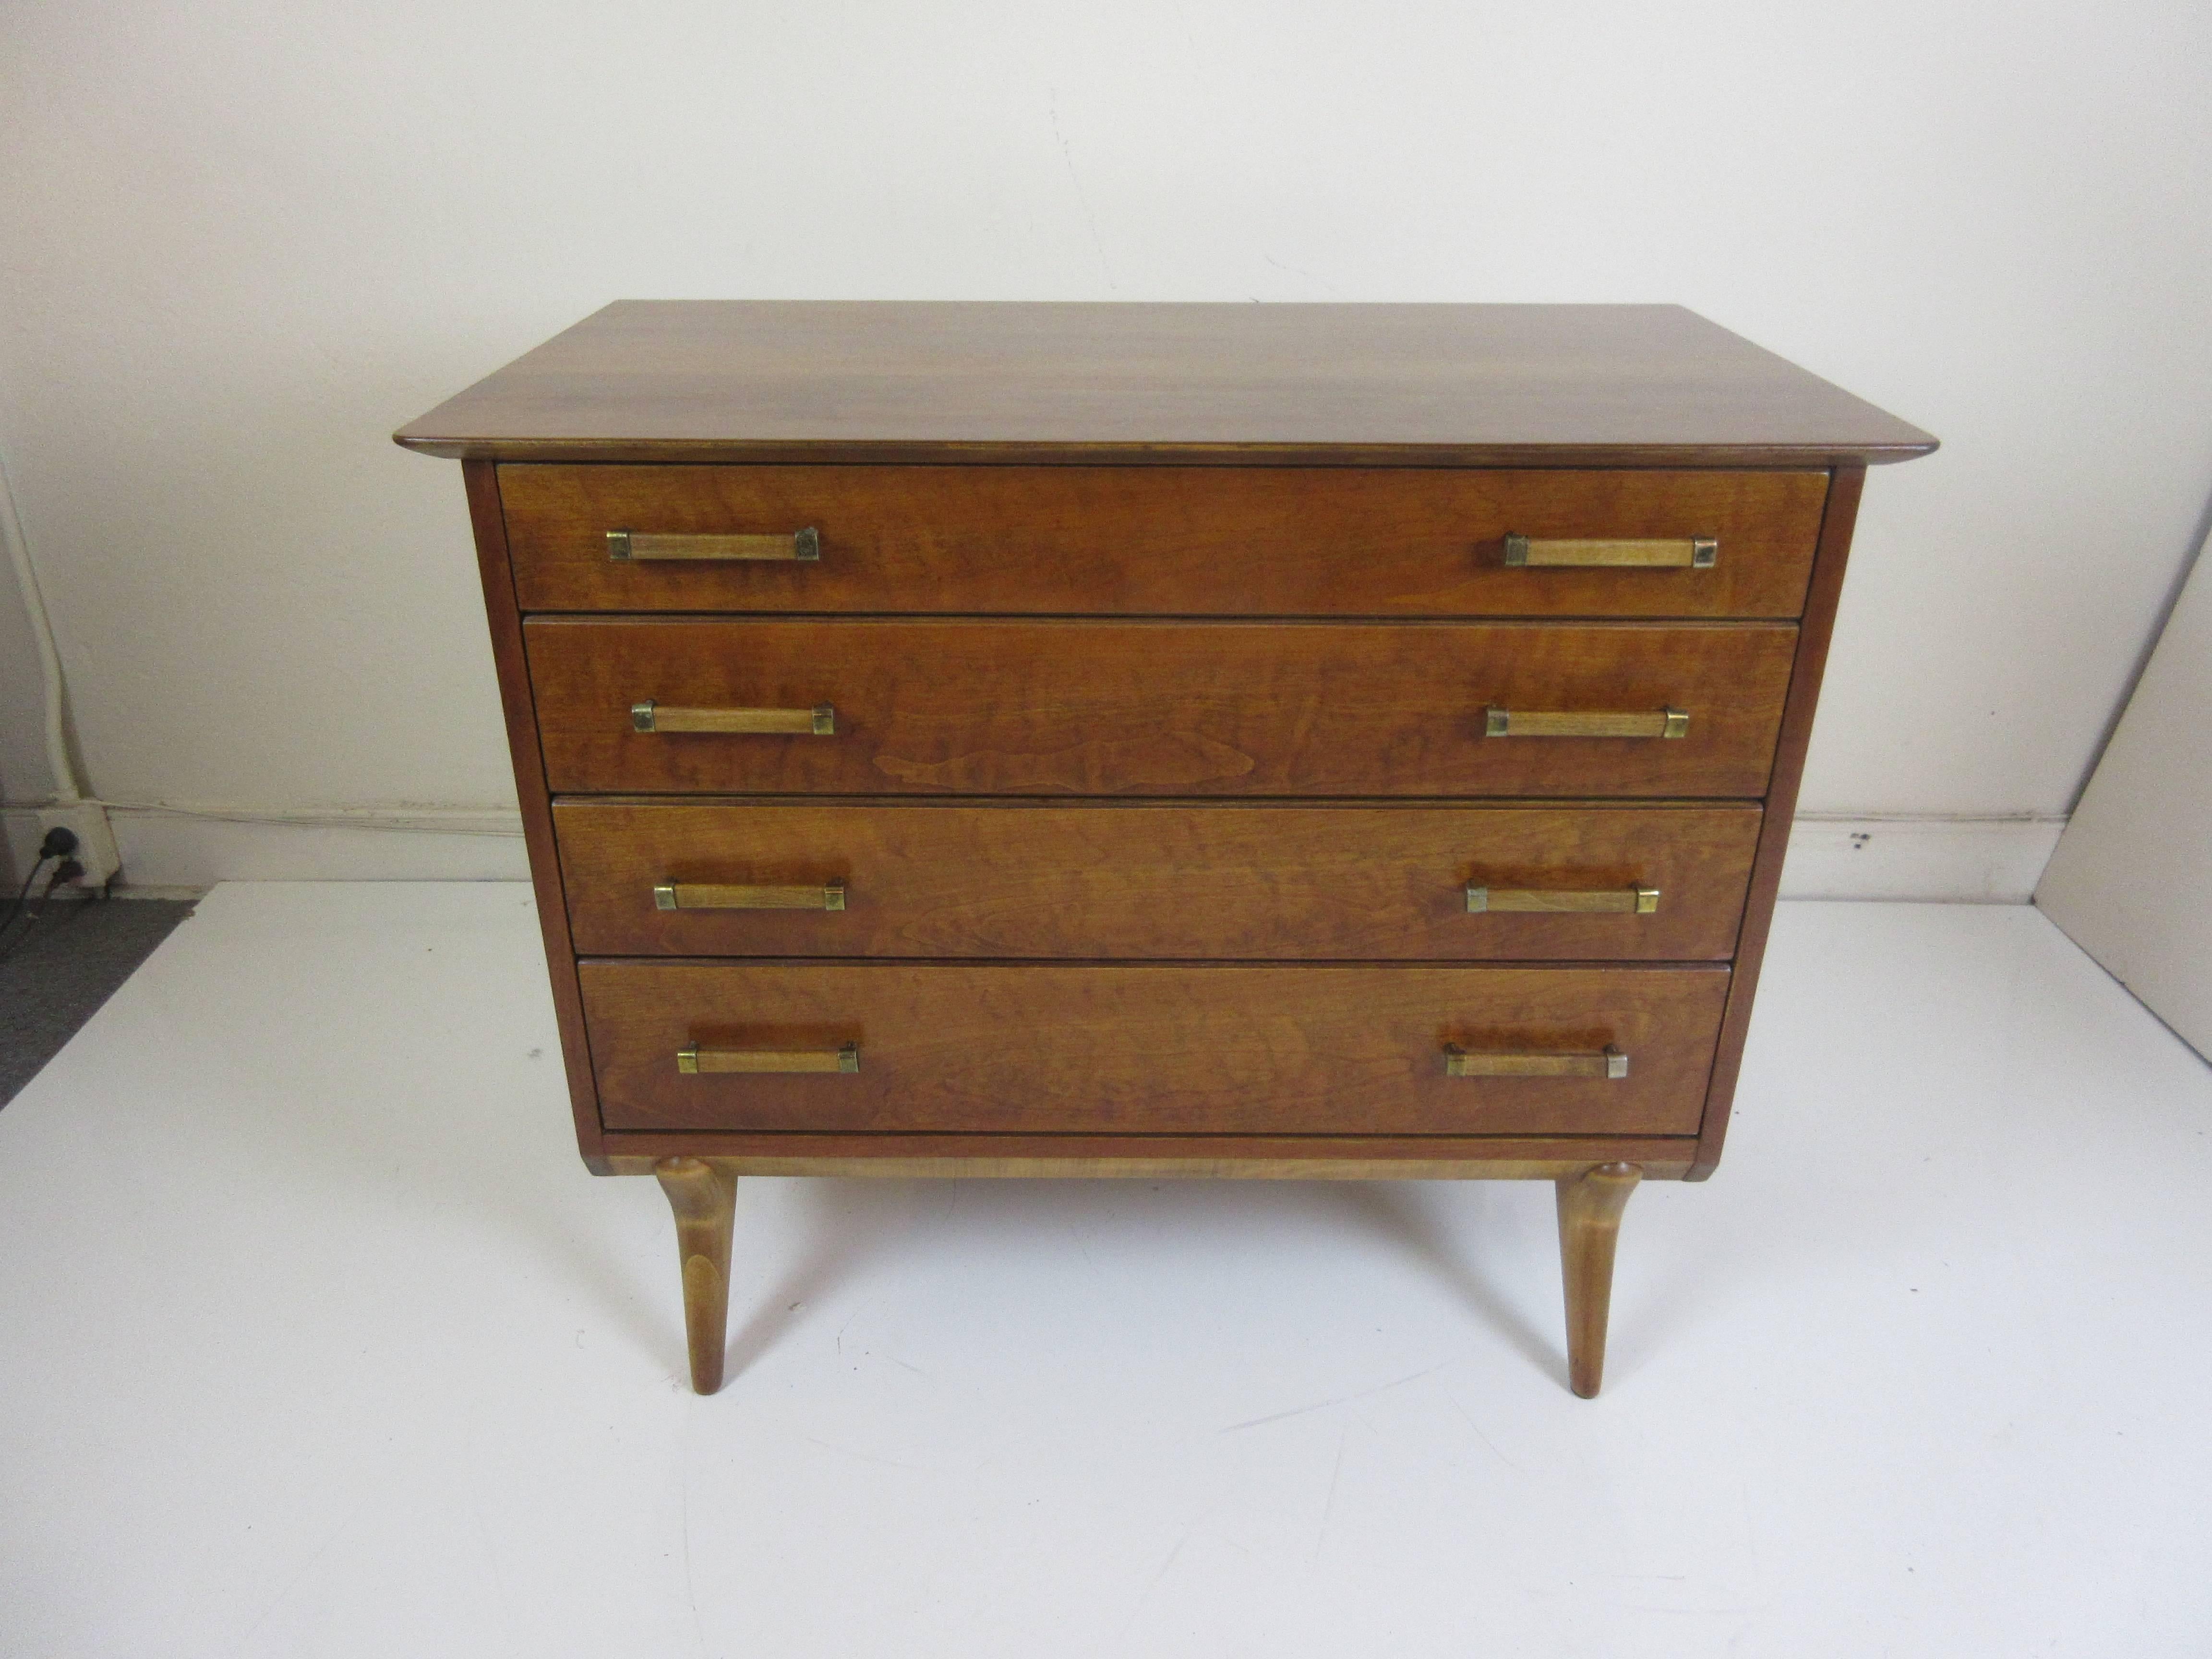 Very nice four-drawer dresser with two-tone accents to legs and handles. Renzo Rutili for Johnson Furniture company. Refinished and ready to go! Legs are blond and front ones angle forward like they are walking! The four-drawer design is probably